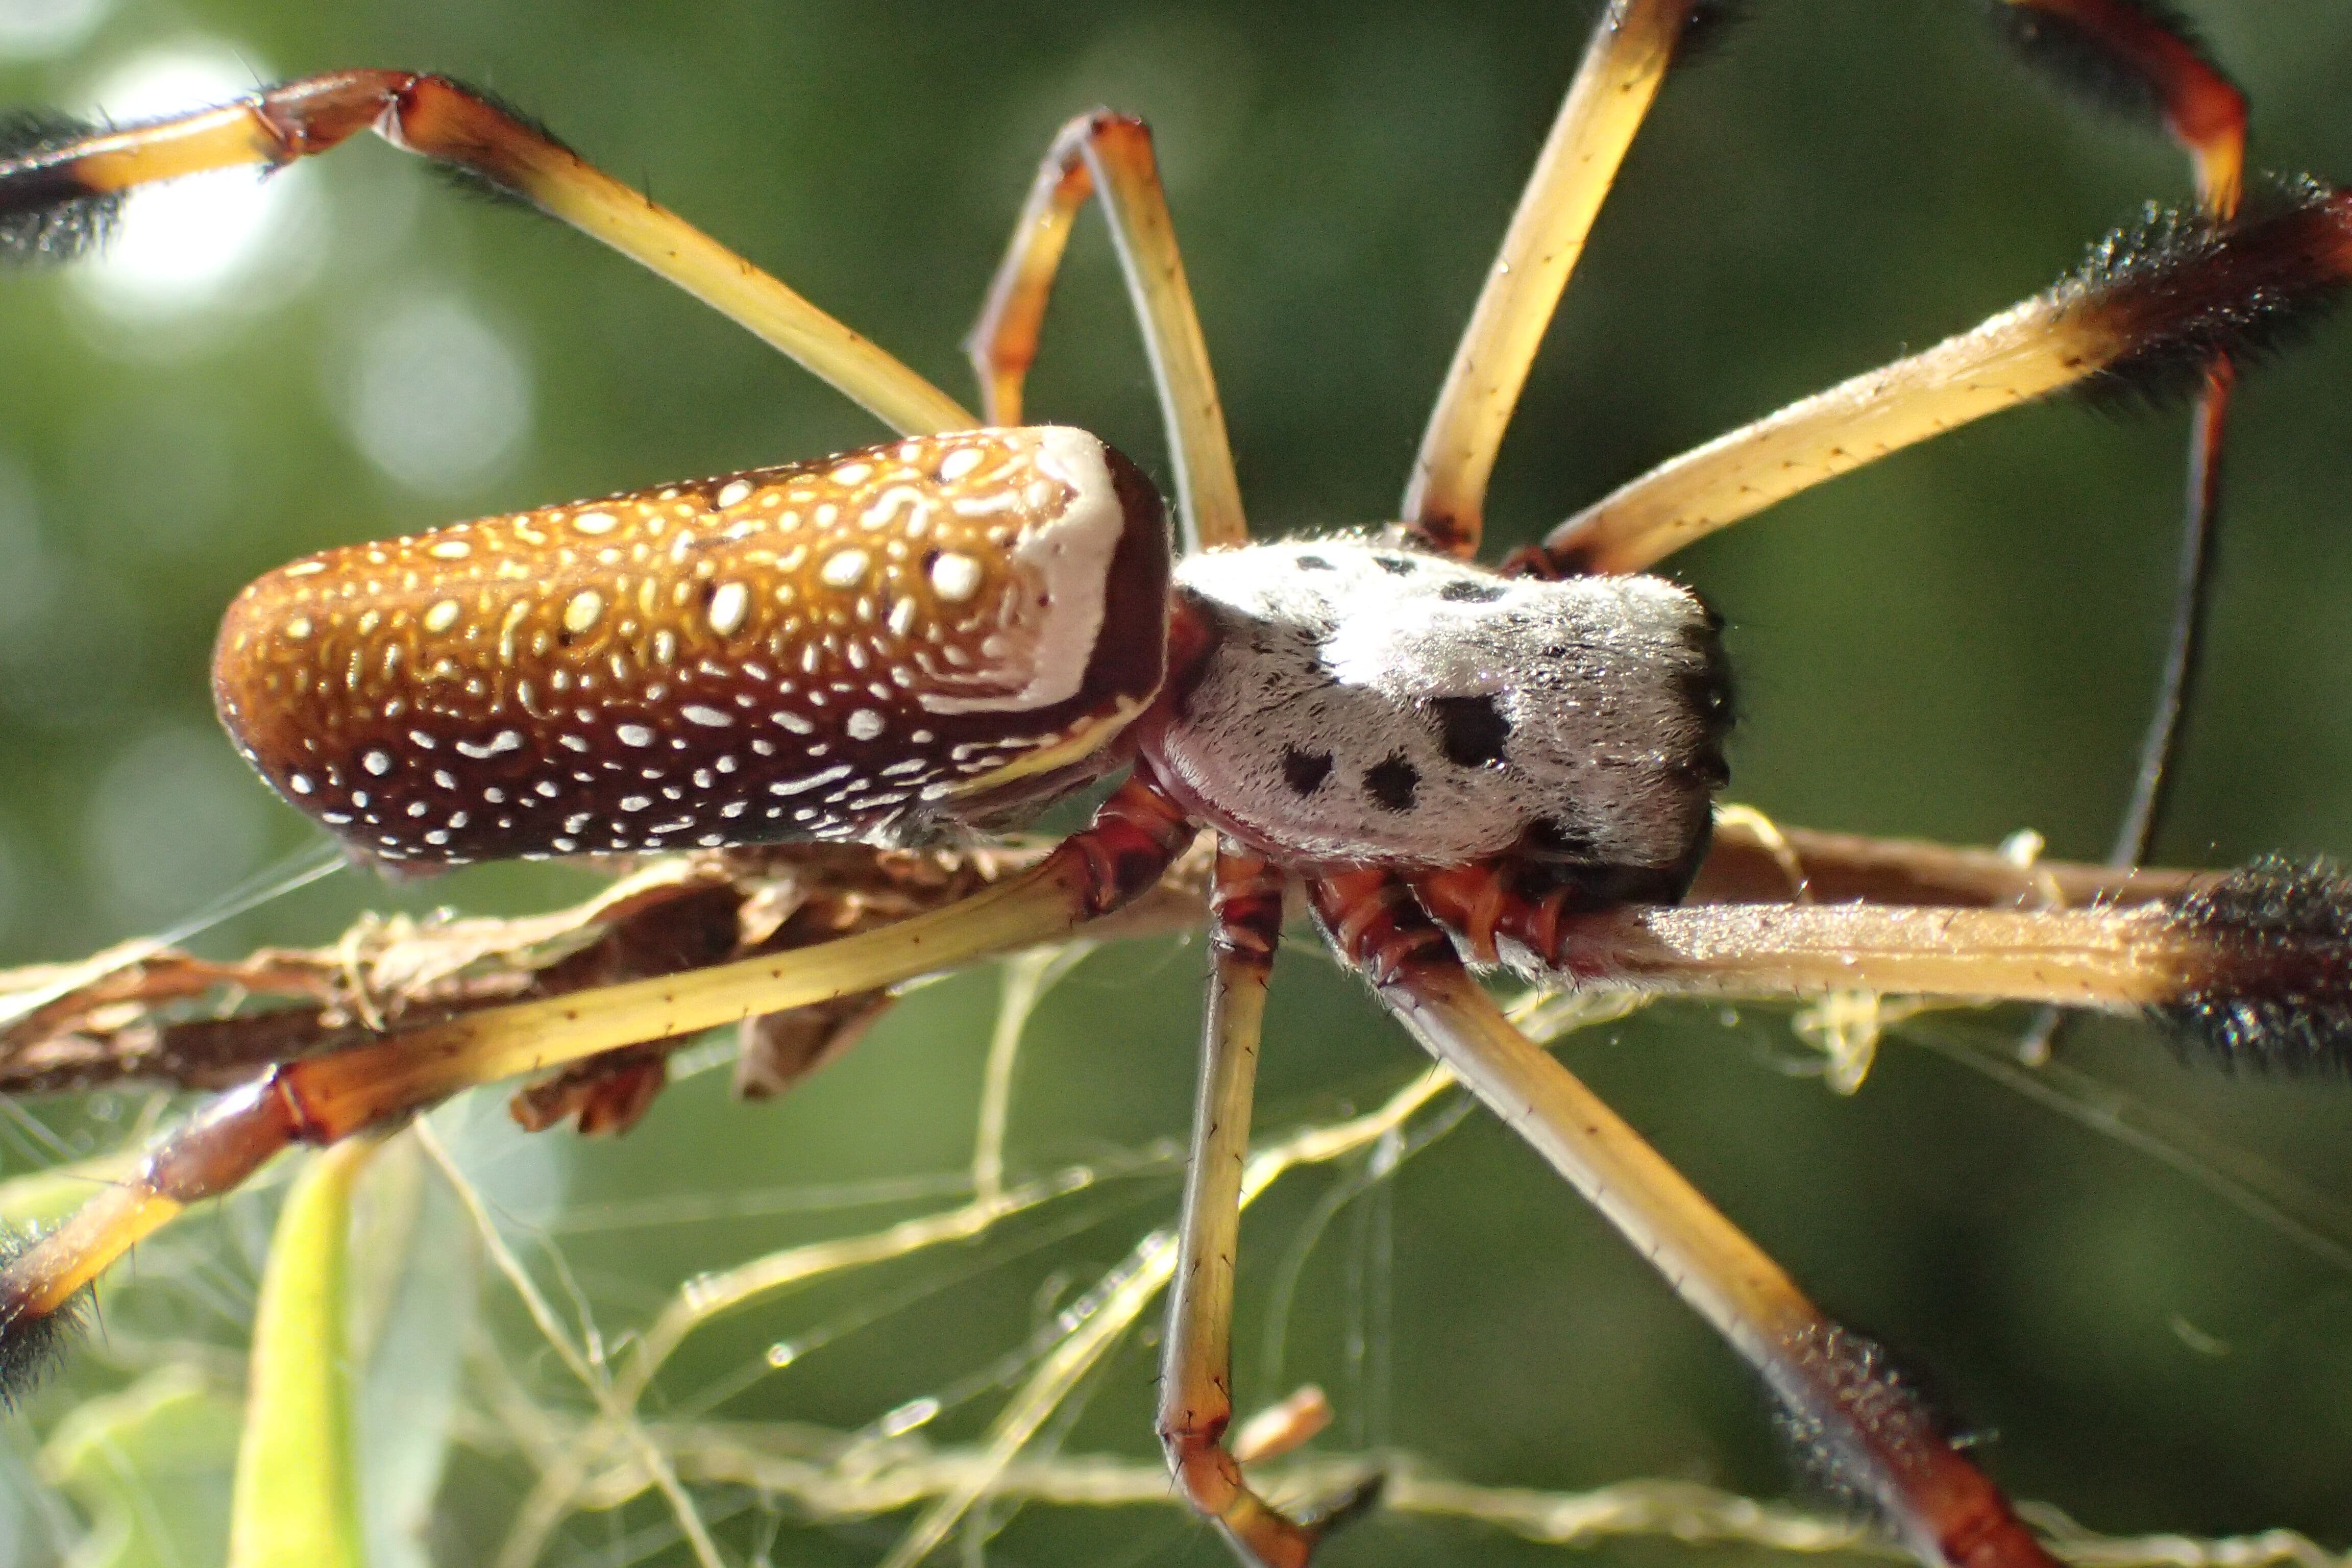 A close up of a spotted yellow spider